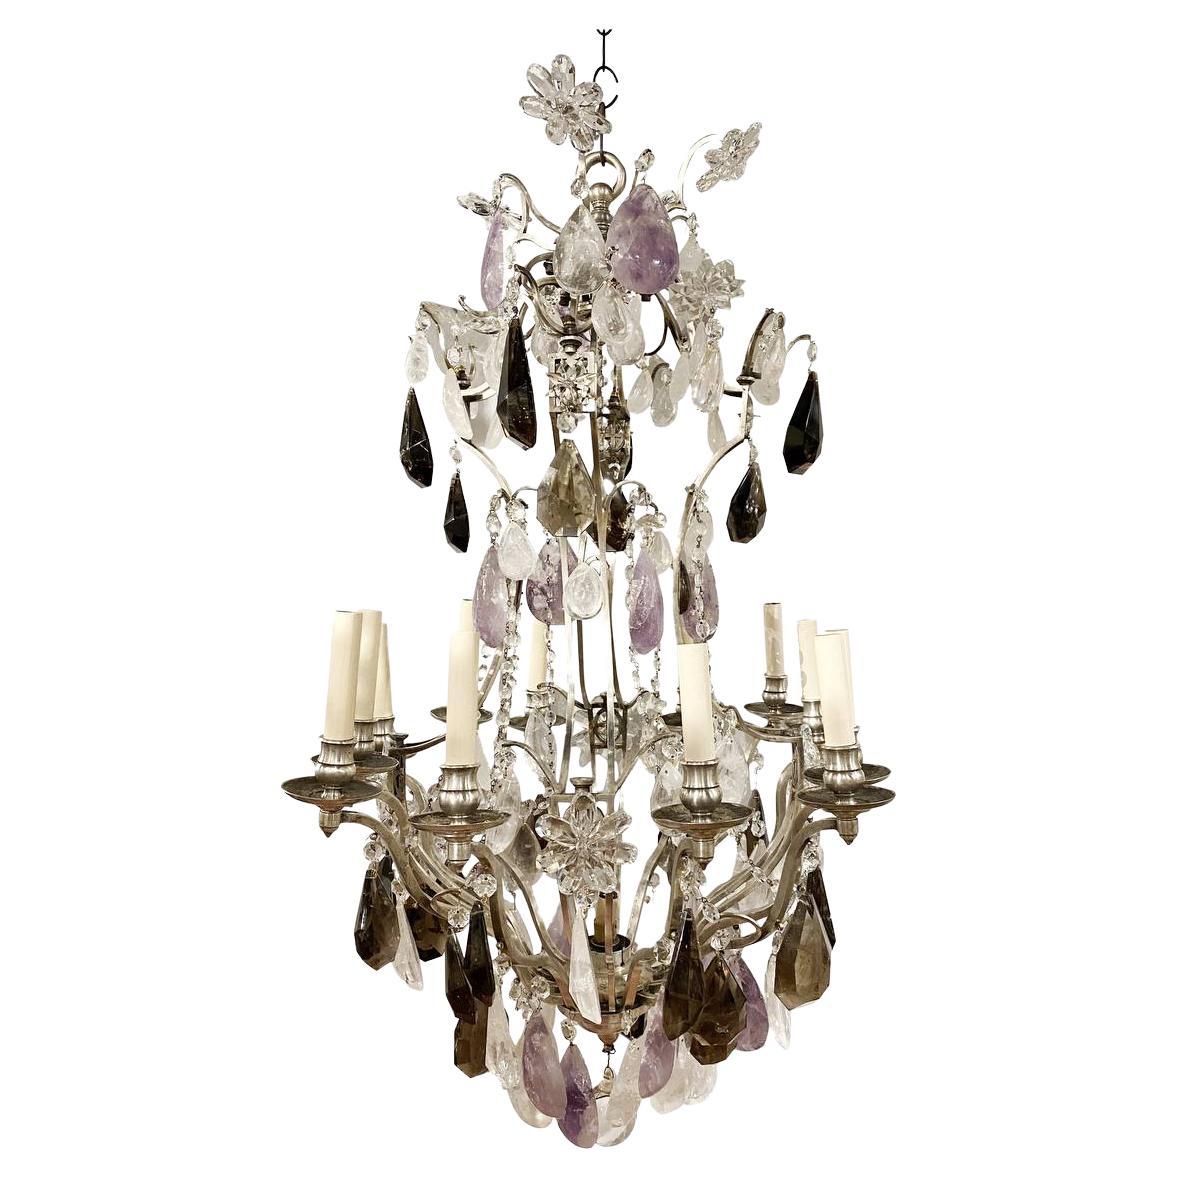 1900's French Silver Plated Chandelier with Rock and Amethyst Crystals For Sale